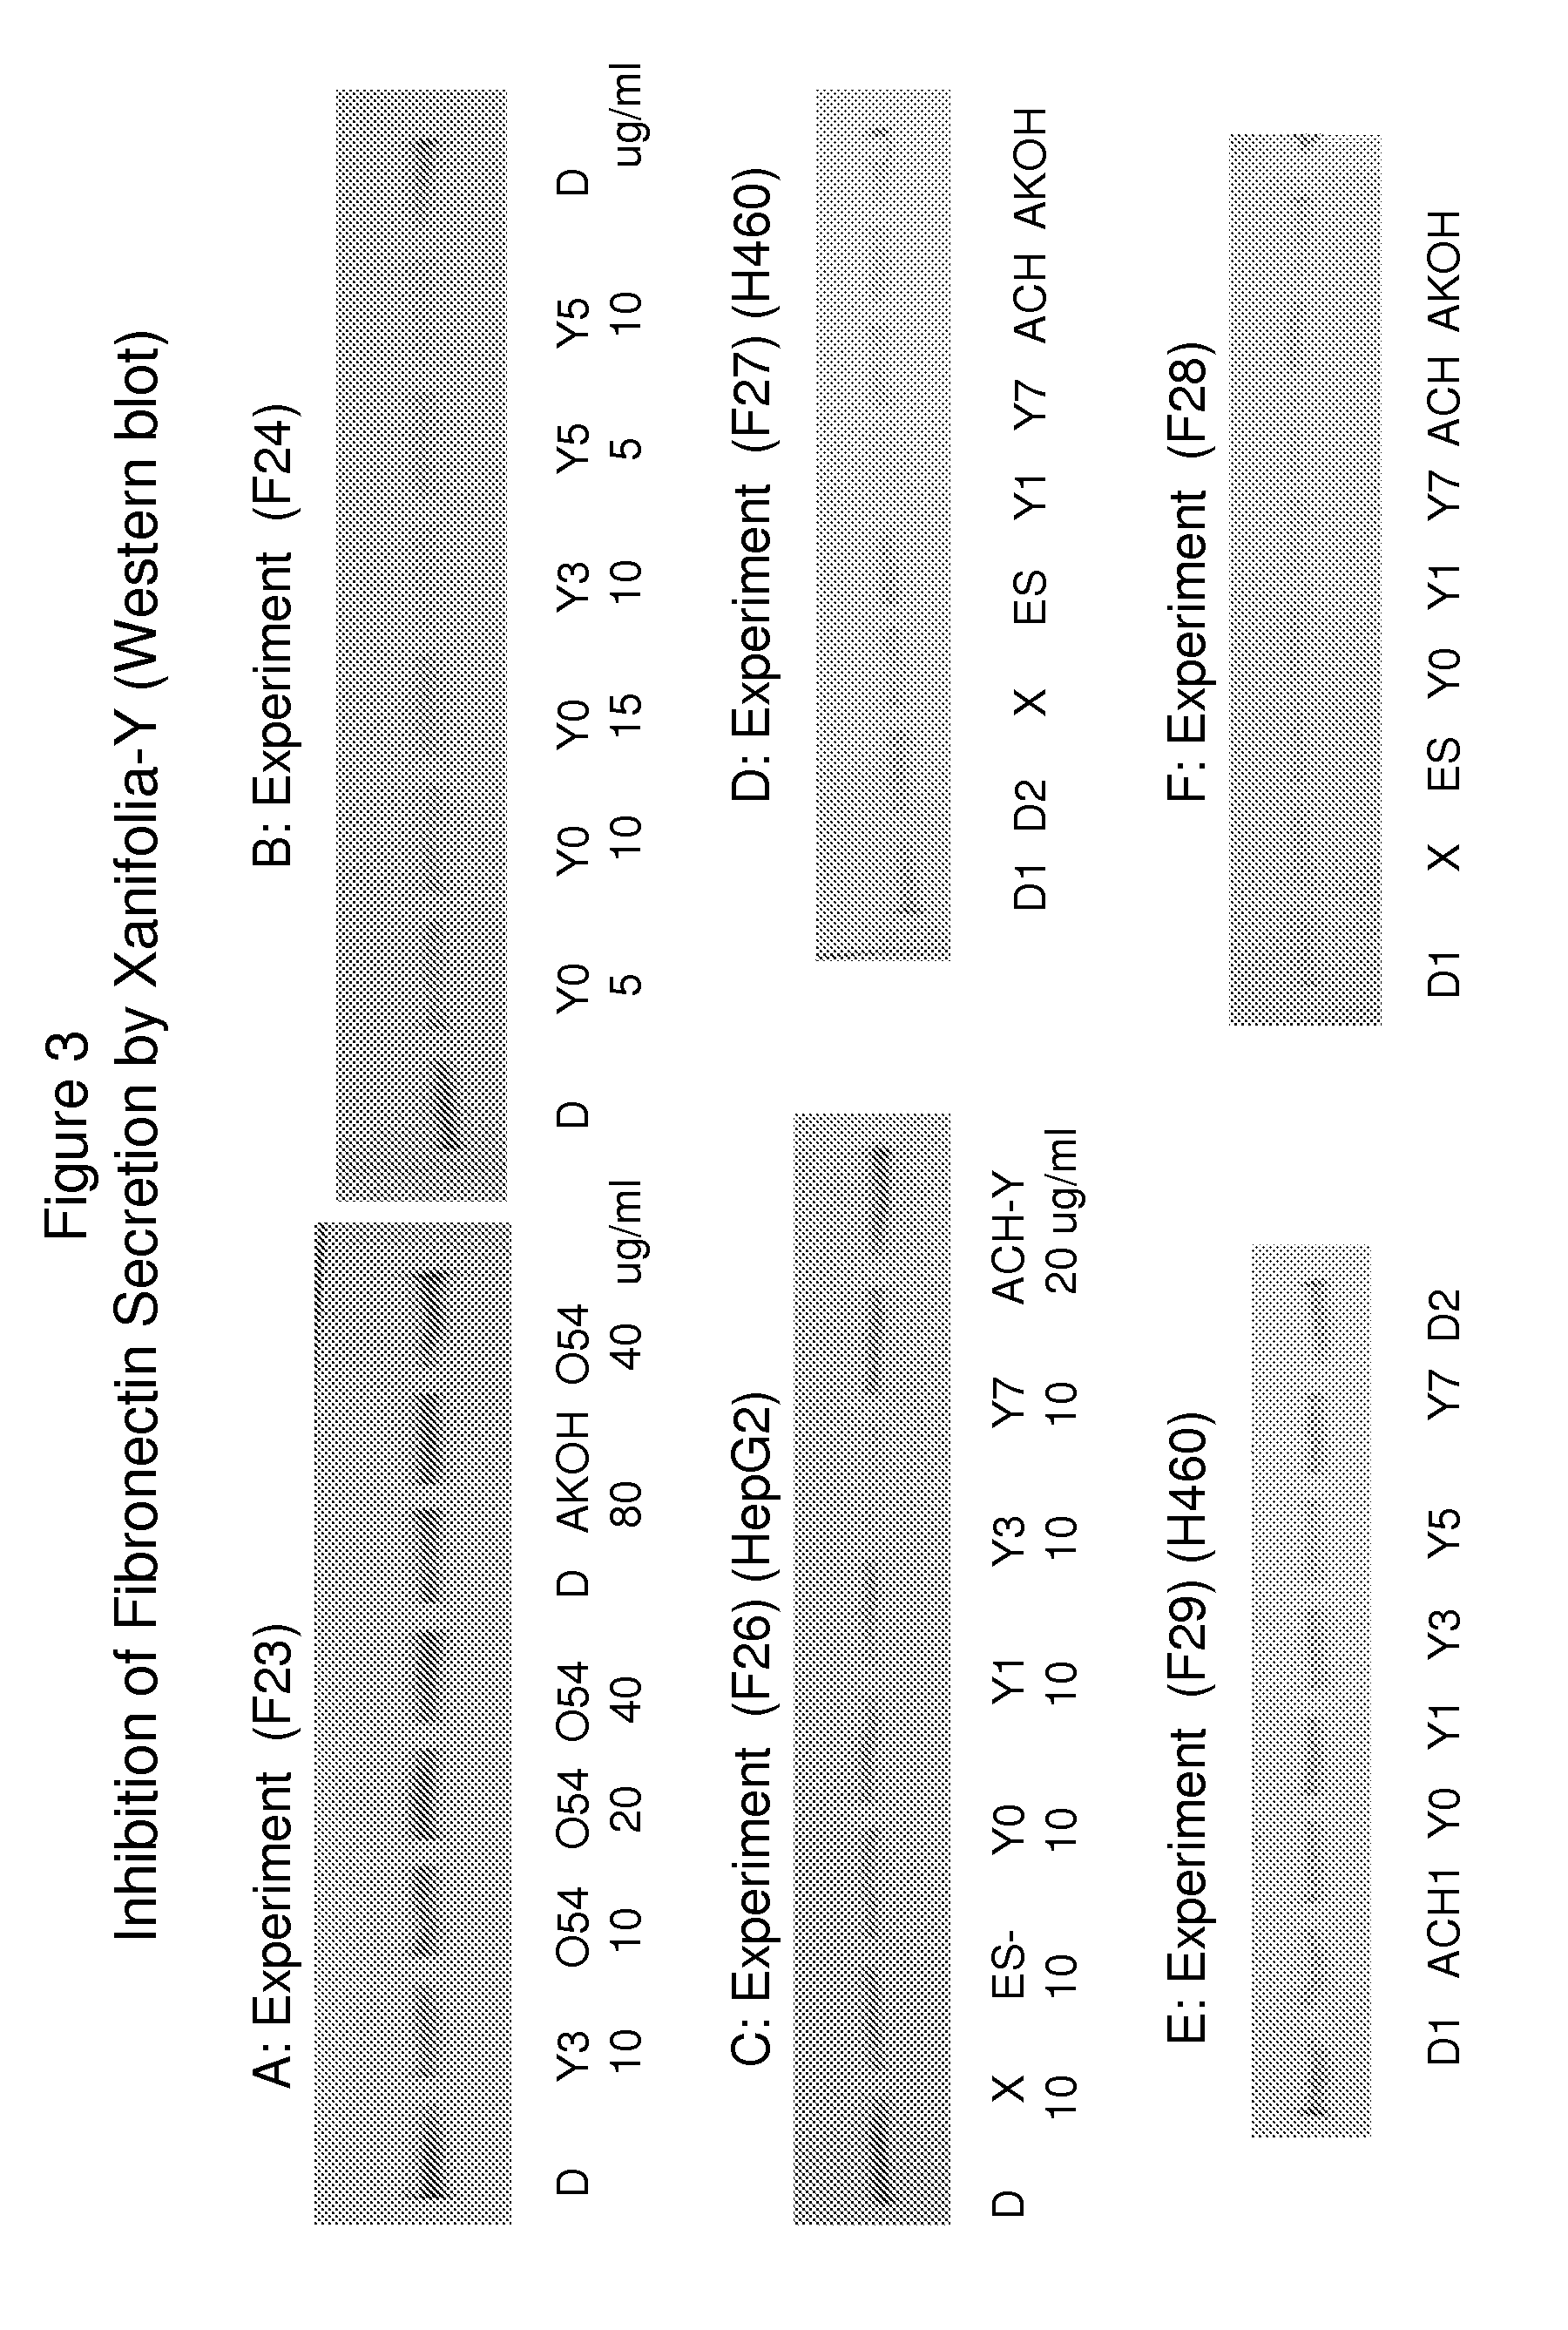 Blocking the migration or metastasis of cancer cells by affecting adhesion proteins and the uses of new compounds thereof